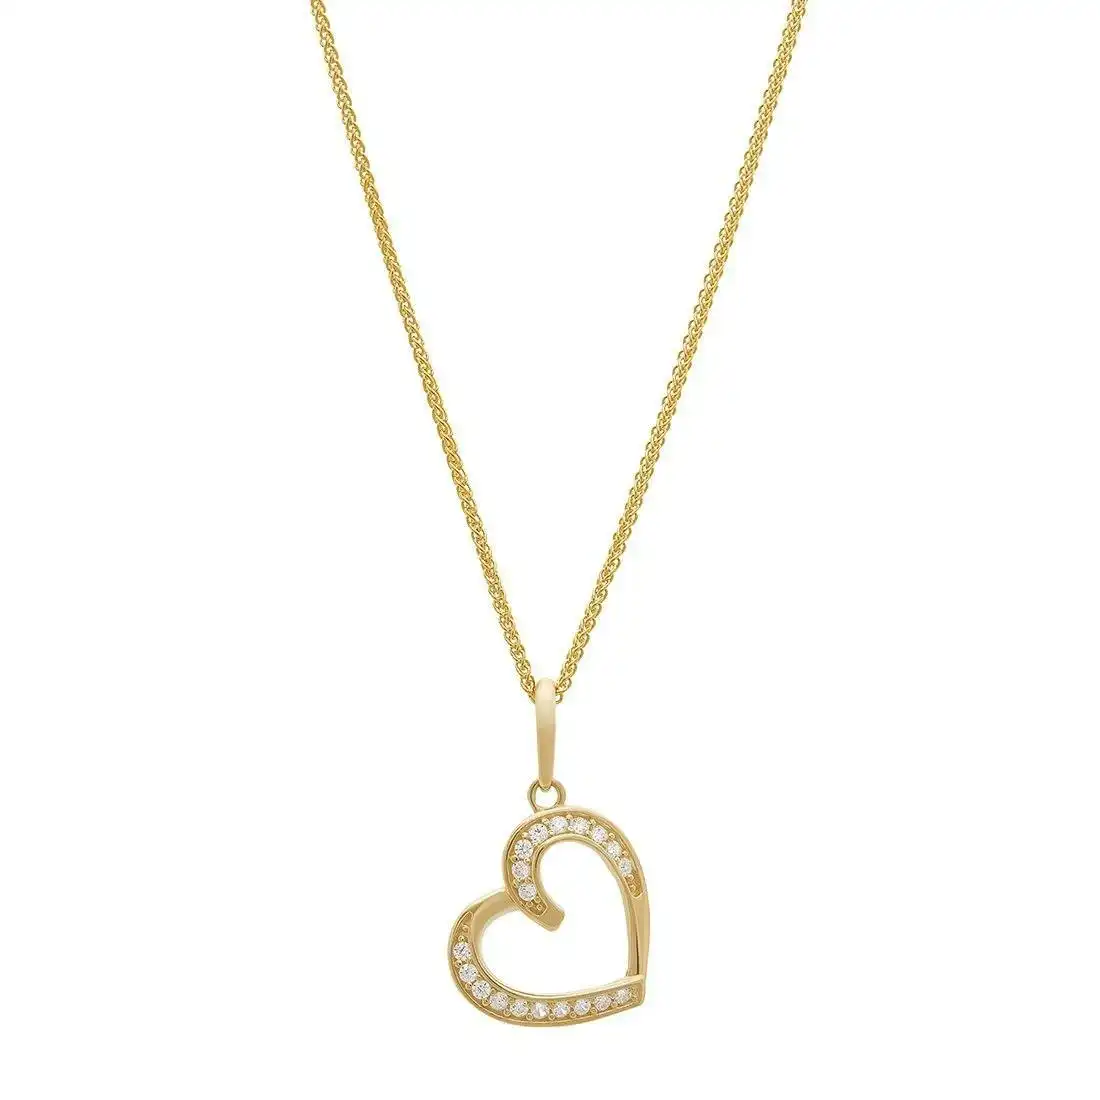 Cubic Zirconia Floating Heart Pendant Necklace in 9ct Yellow Gold